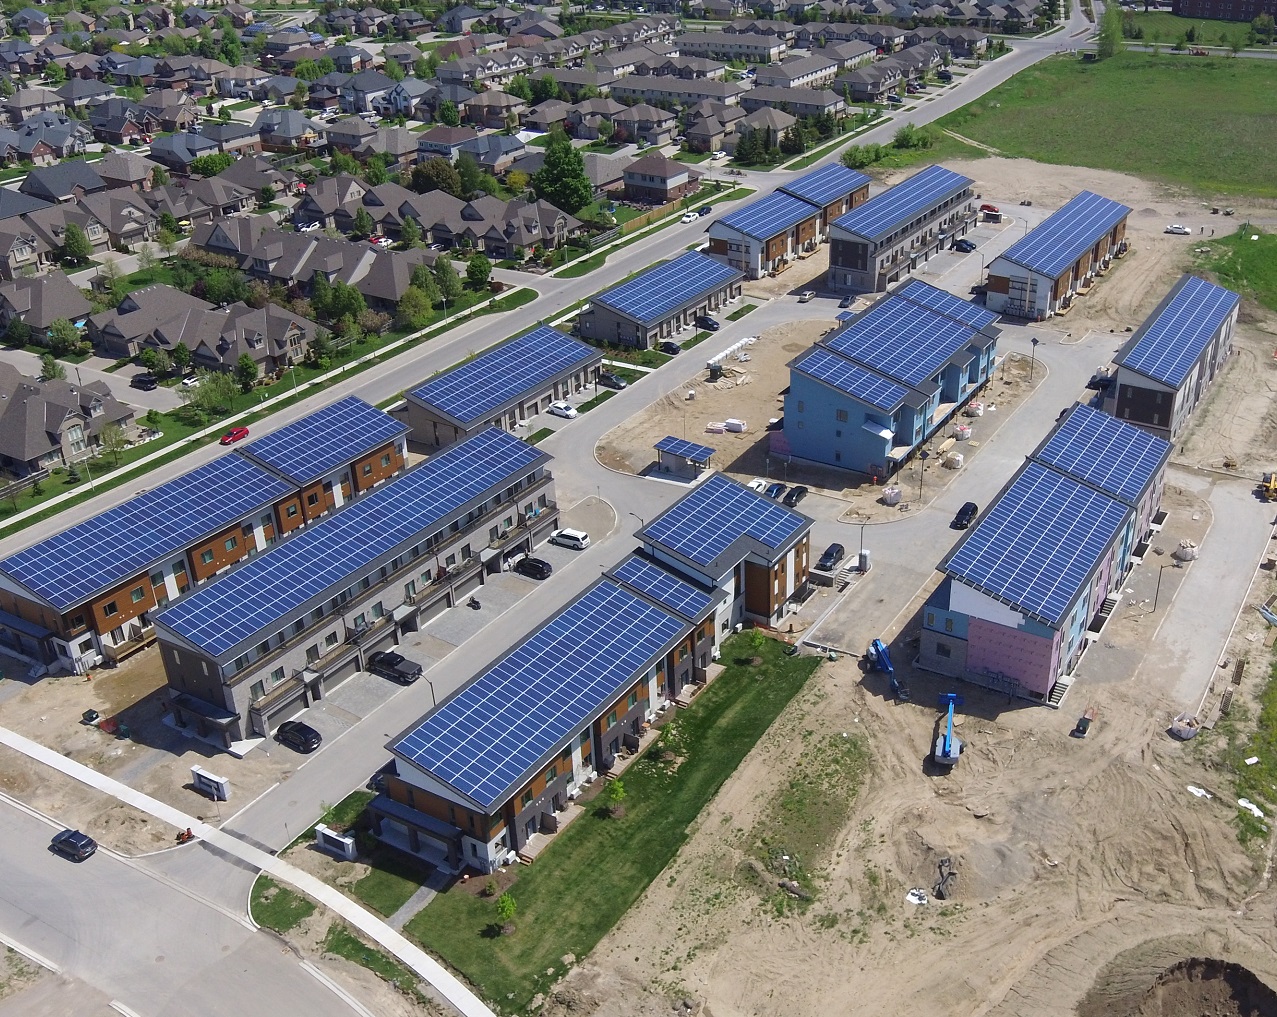 Solar panels on Net Zero townhomes by Sifton Properties